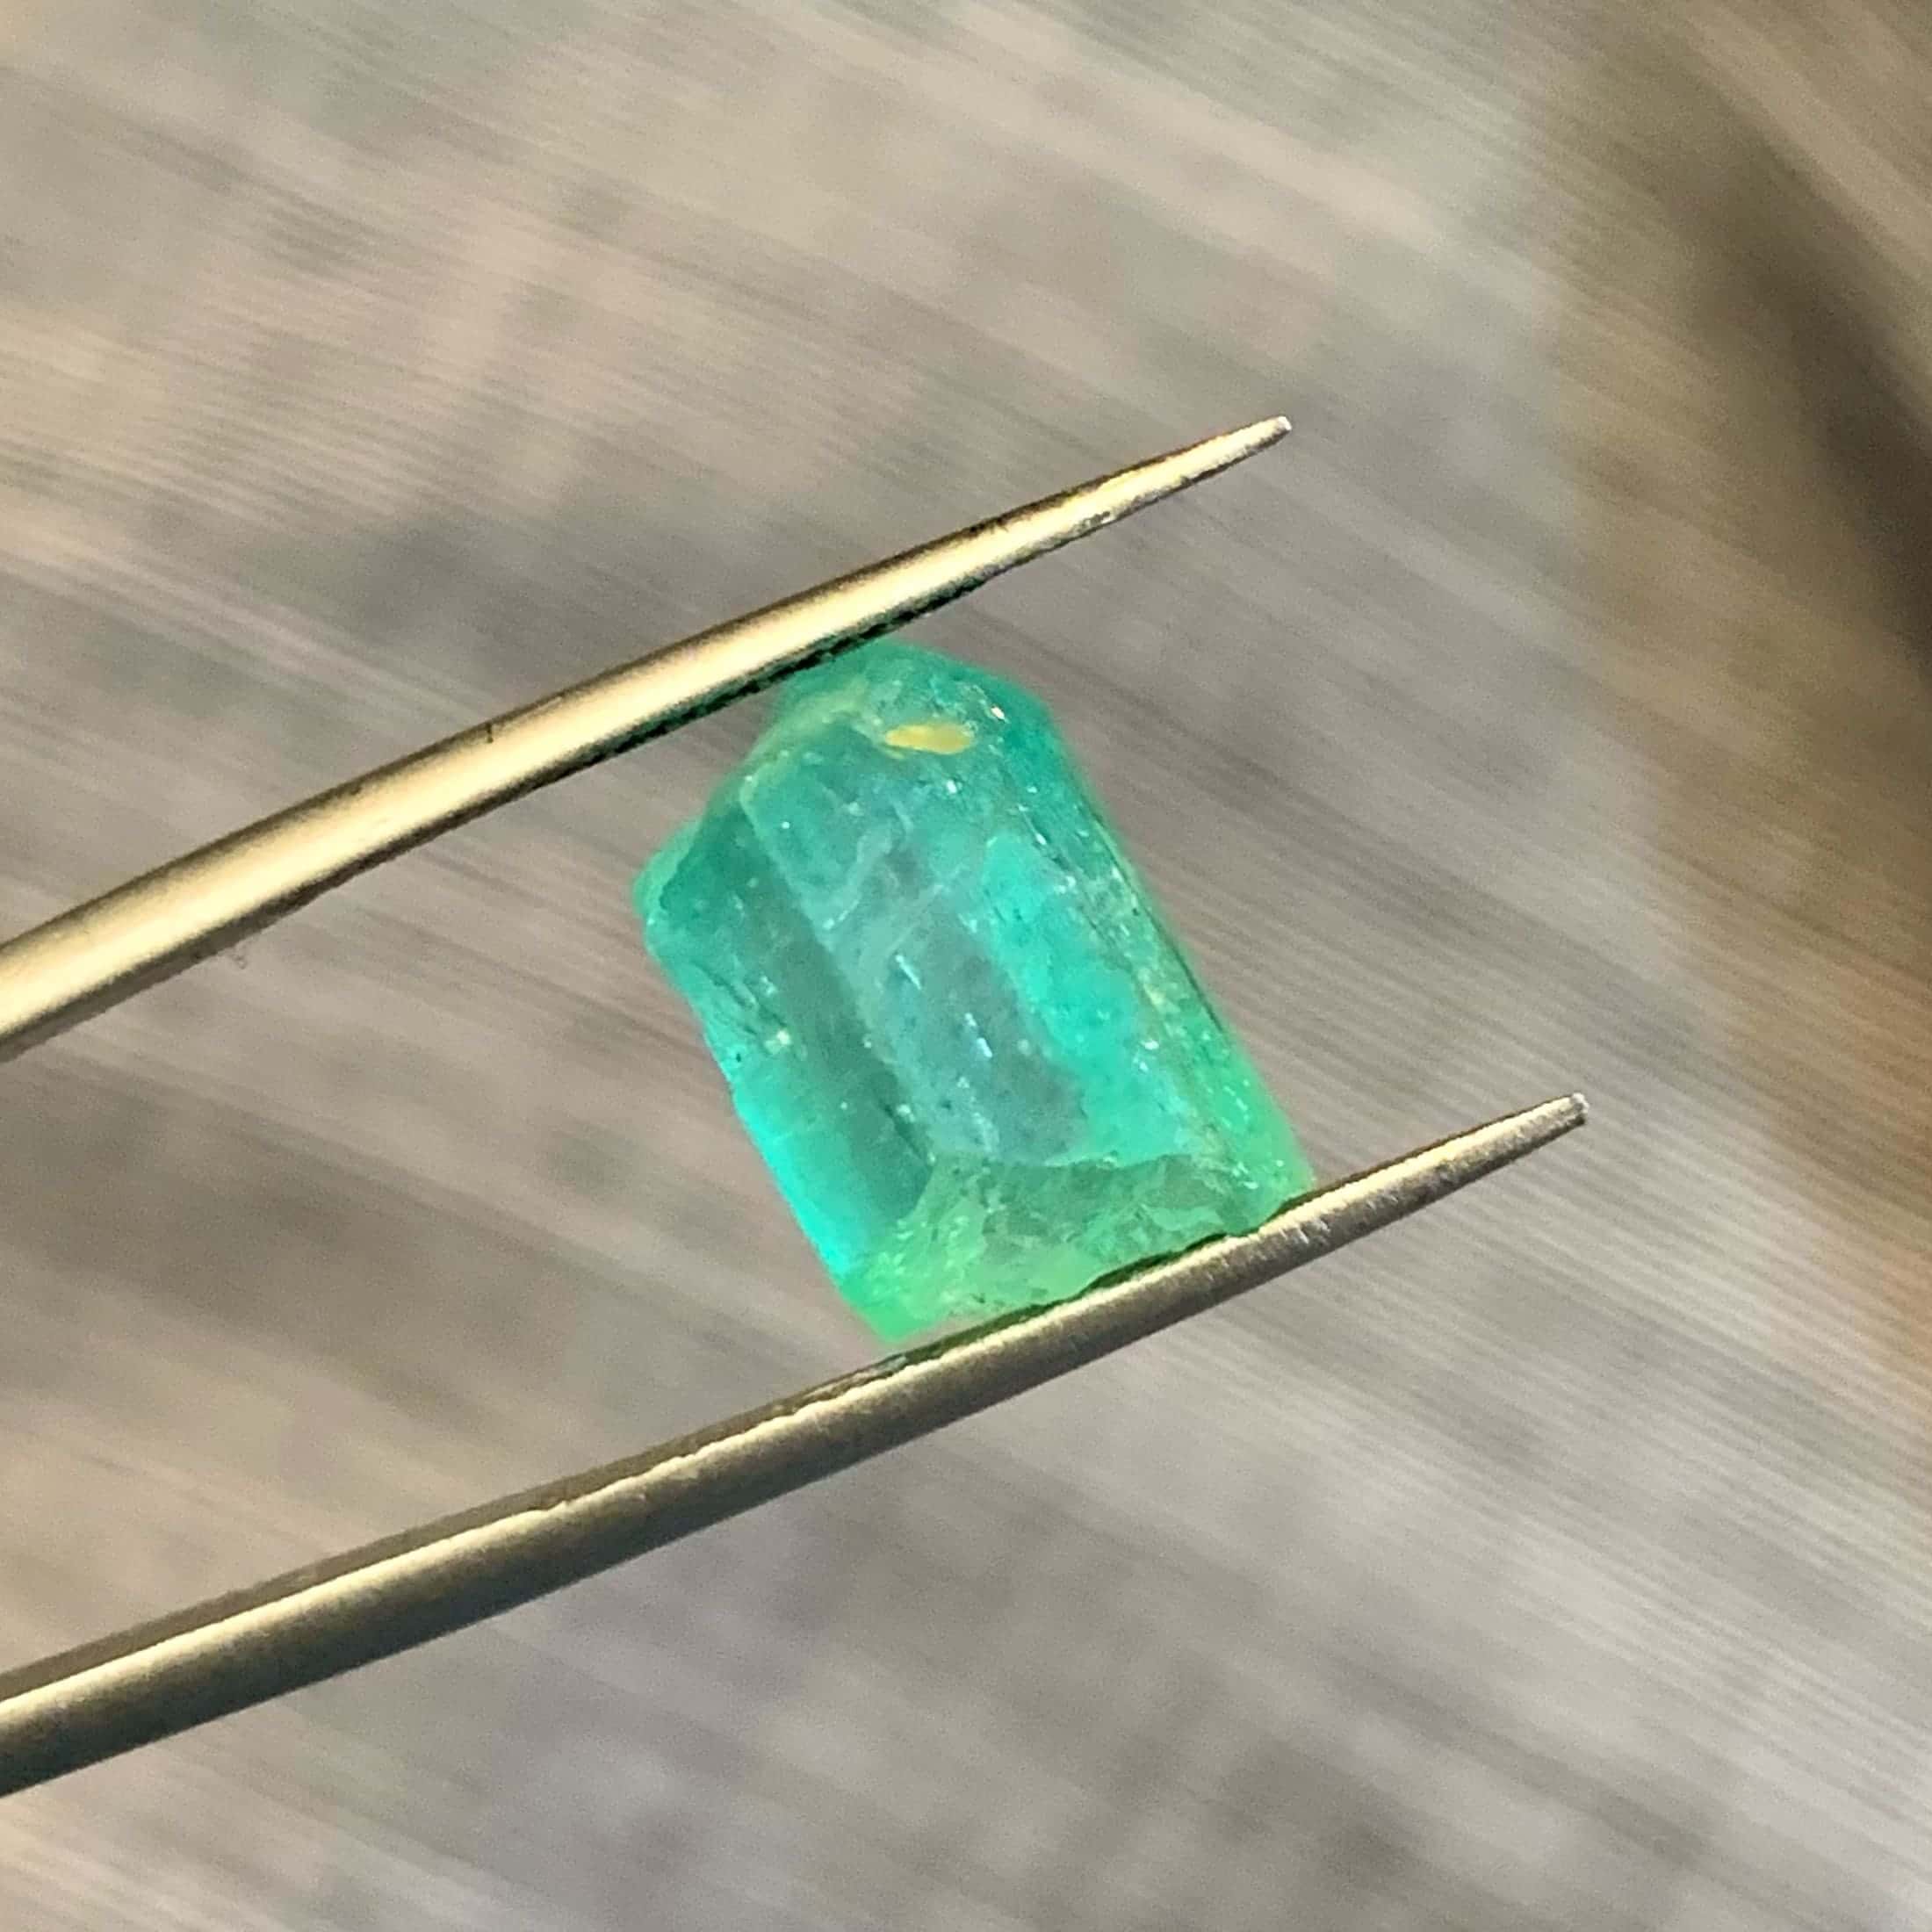 6.35 Carats Beautiful Cutting Grade Rough Emerald from Afghanistan